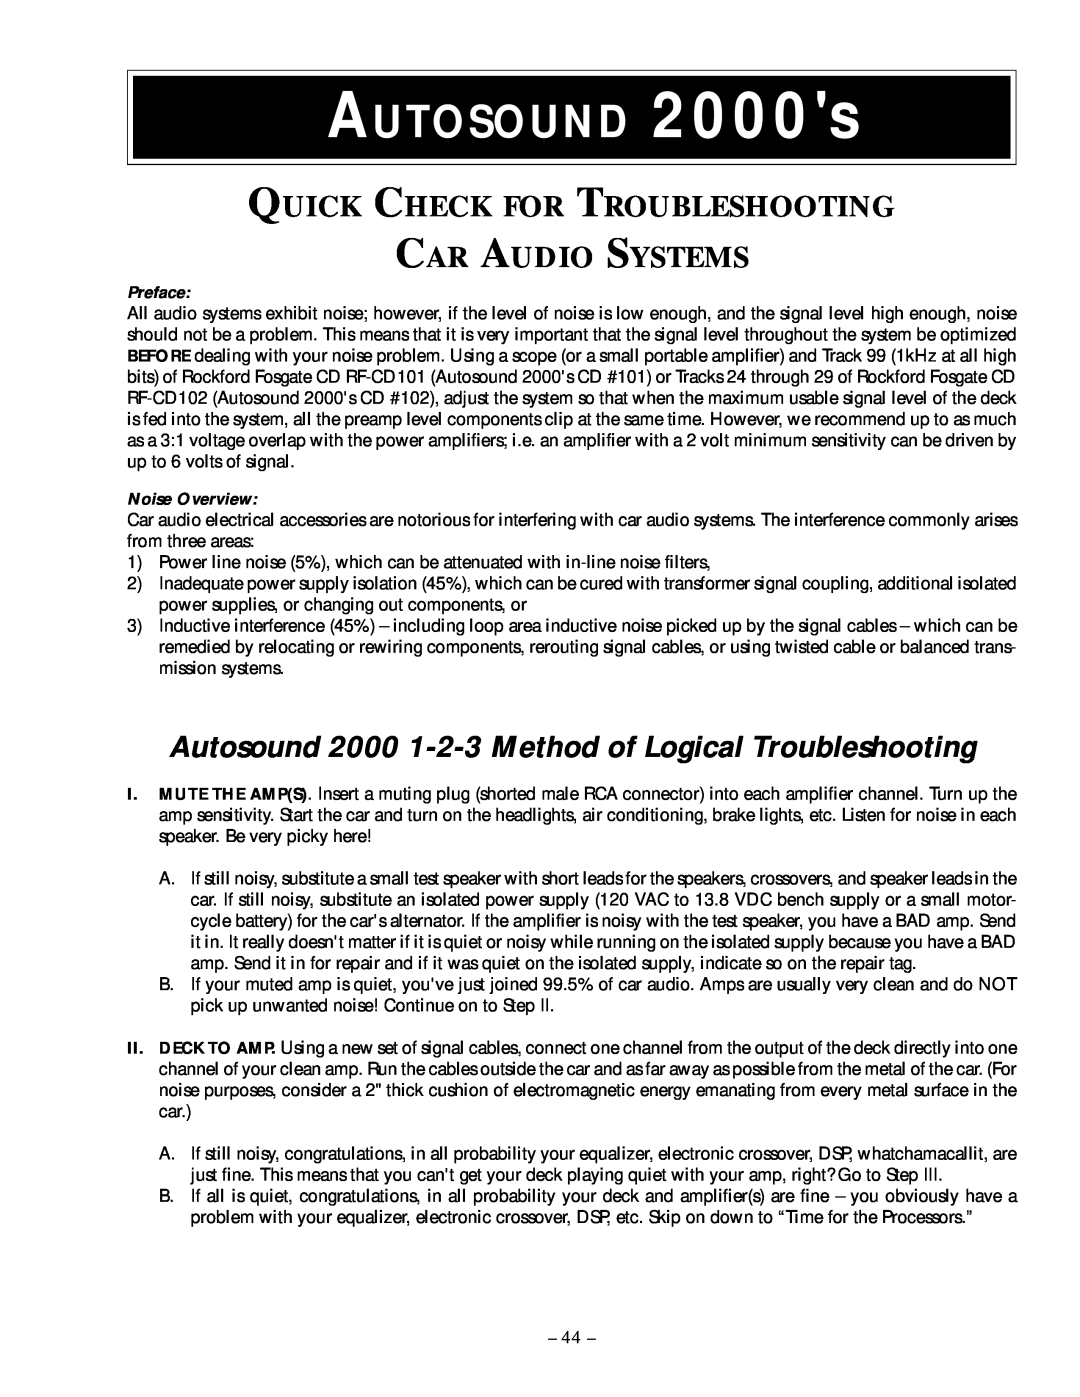 Rockford Fosgate 250.1 manual Quick Check For Troubleshooting Car Audio Systems, AUTOSOUND 2000s, Preface, Noise Overview 